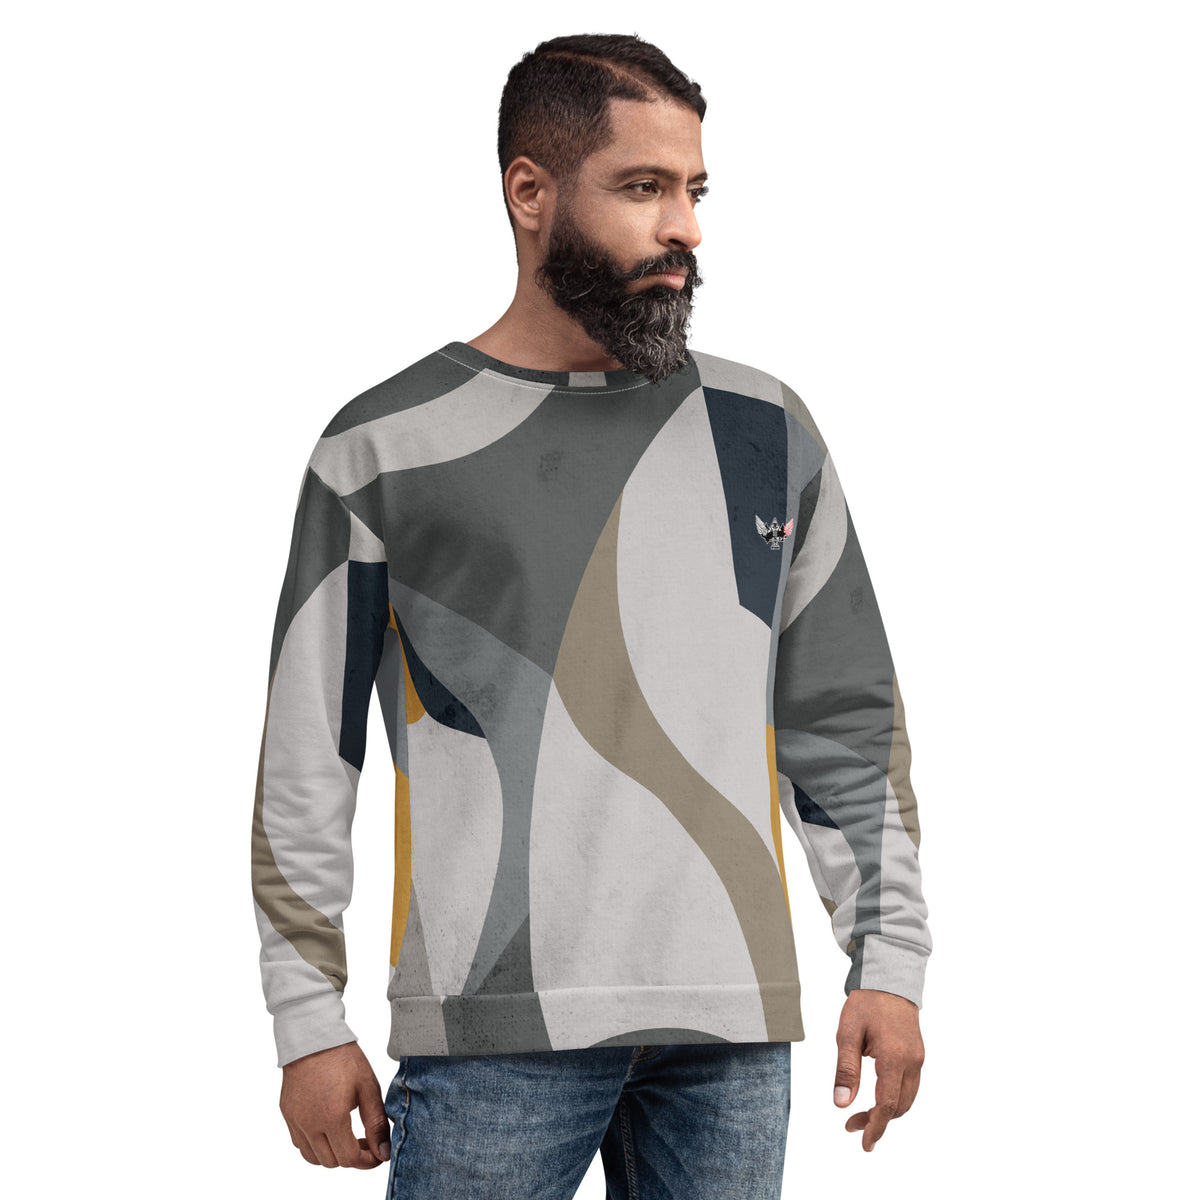 The Heir Apparent Sweater – Three Spades Clothing